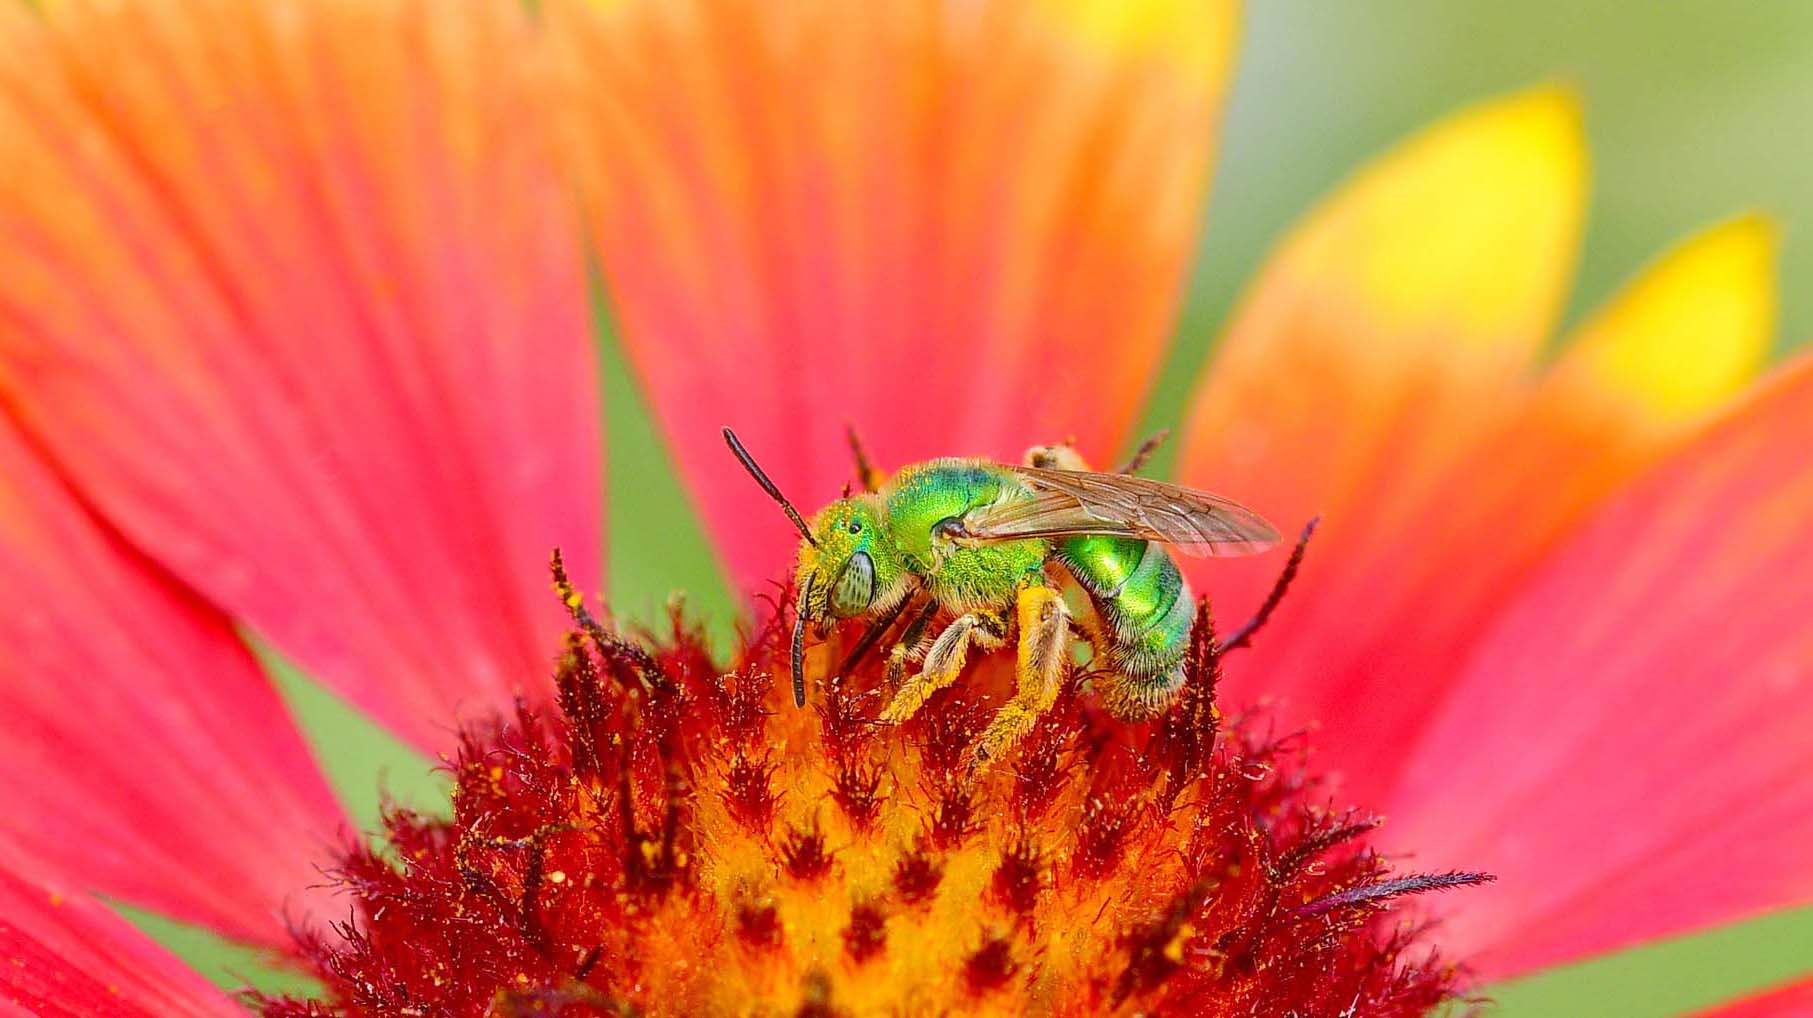 Close-up of a metallic green bee on a flower